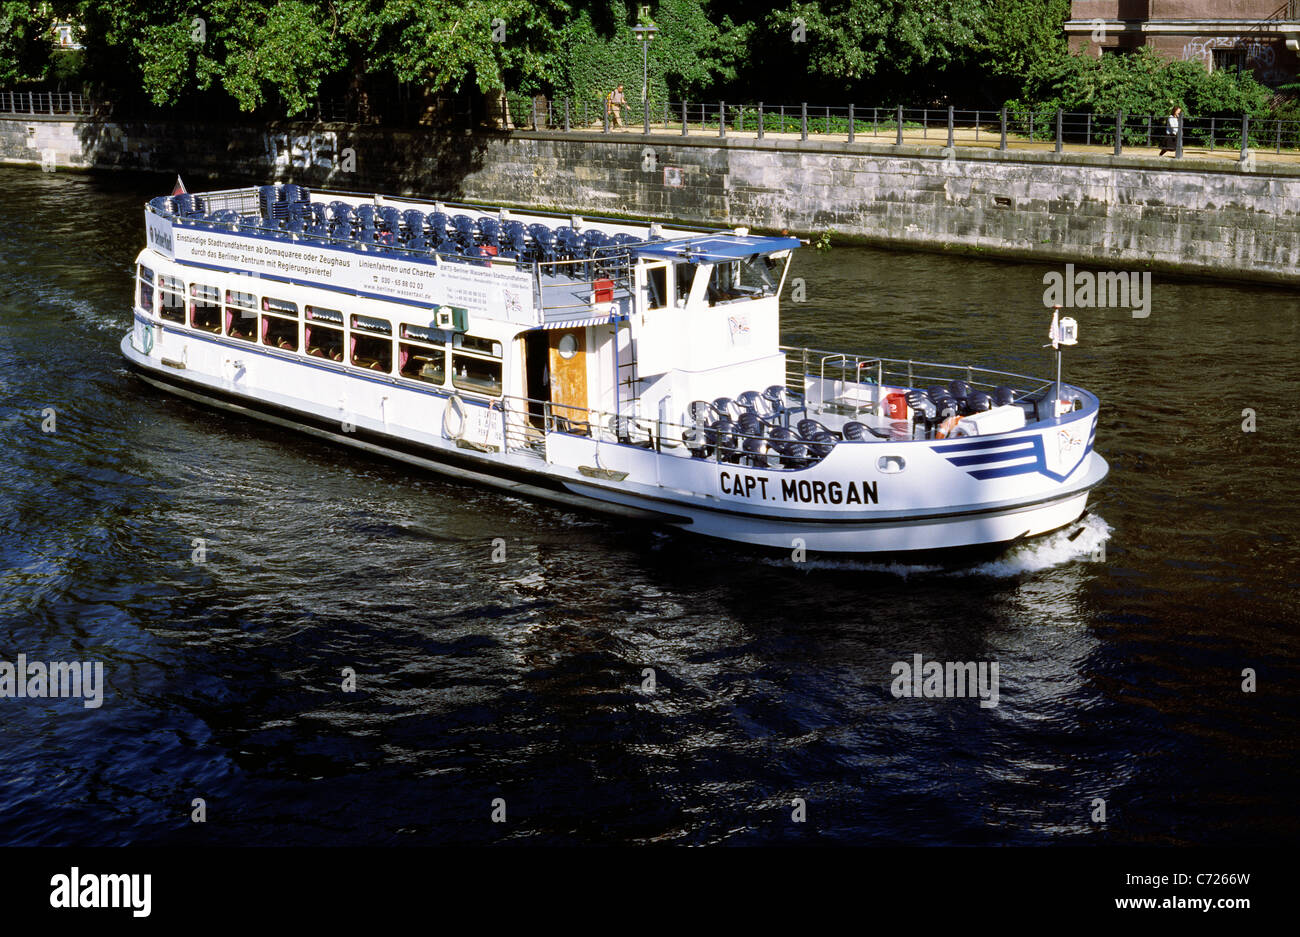 Riverboat Captain High Resolution Stock Photography and Images - Alamy